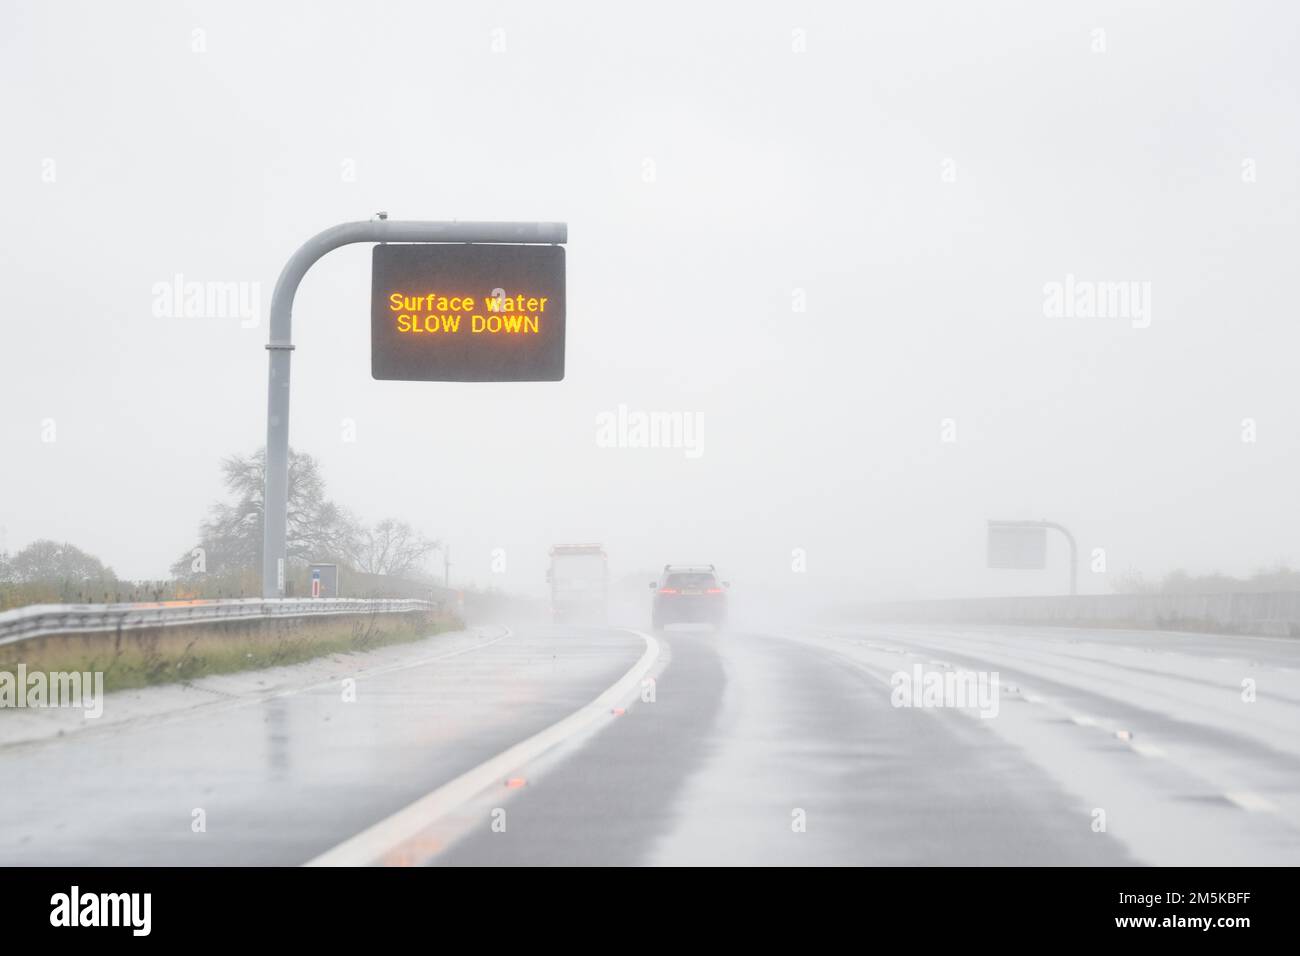 Surface water SLOW DOWN variable message sign on UK motorway during heavy rain Stock Photo